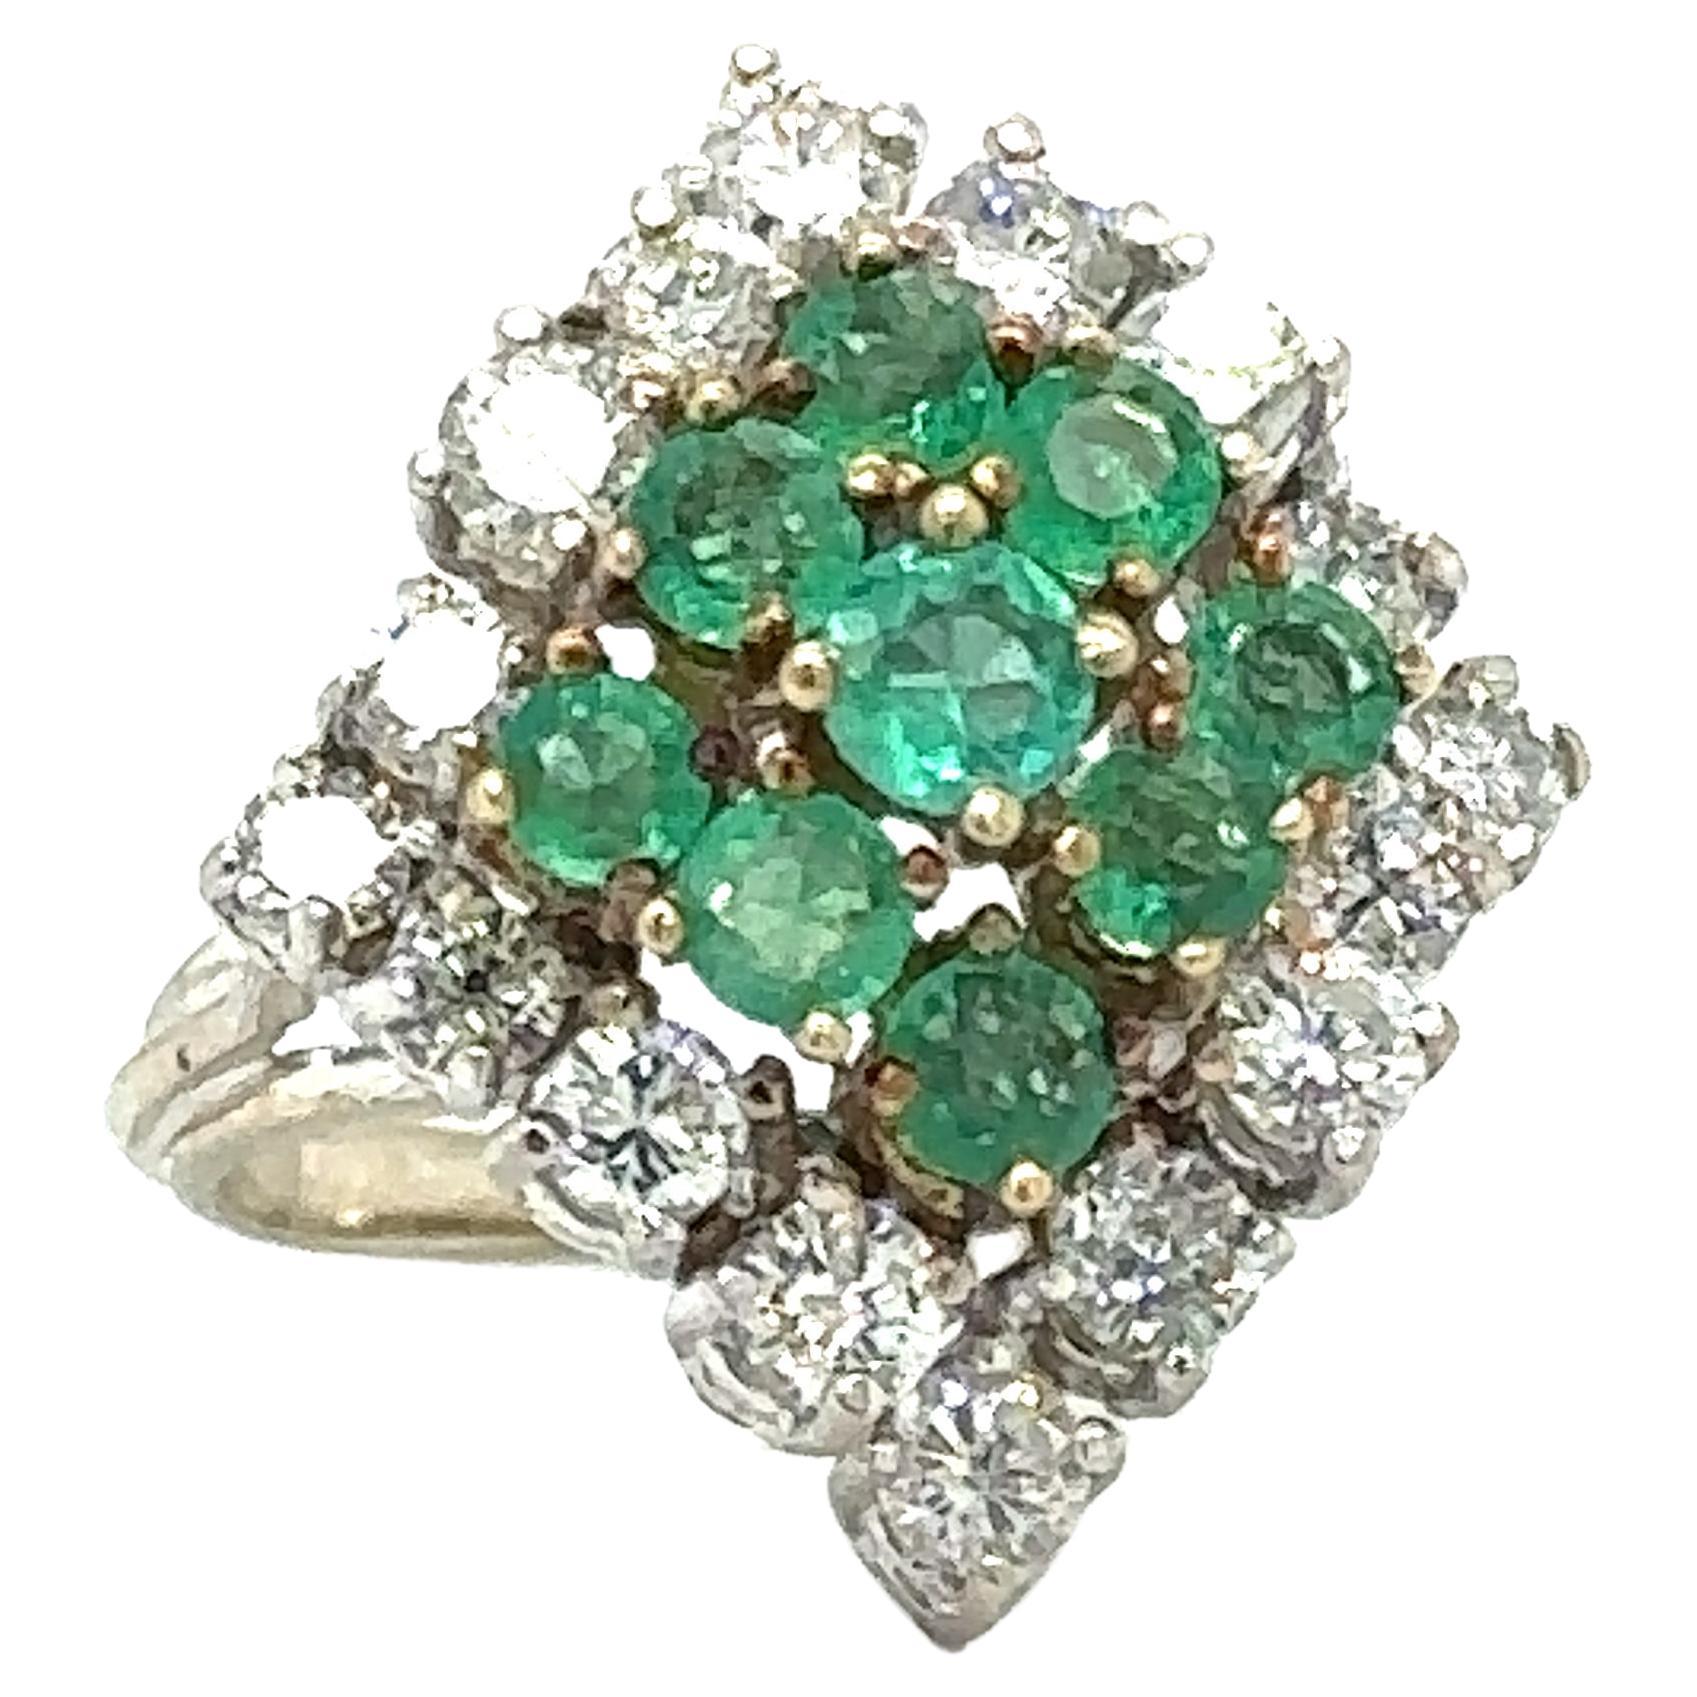 Item Details: This cocktail ring studded with gemstones has over a carat each of diamonds and Colombian emeralds.

Circa: 1950s
Metal Type: 14 Karat White and Yellow Gold
Weight: 7.7 grams
Size: US 5, resizable

Diamond Details:
Carat: 1.0 carat